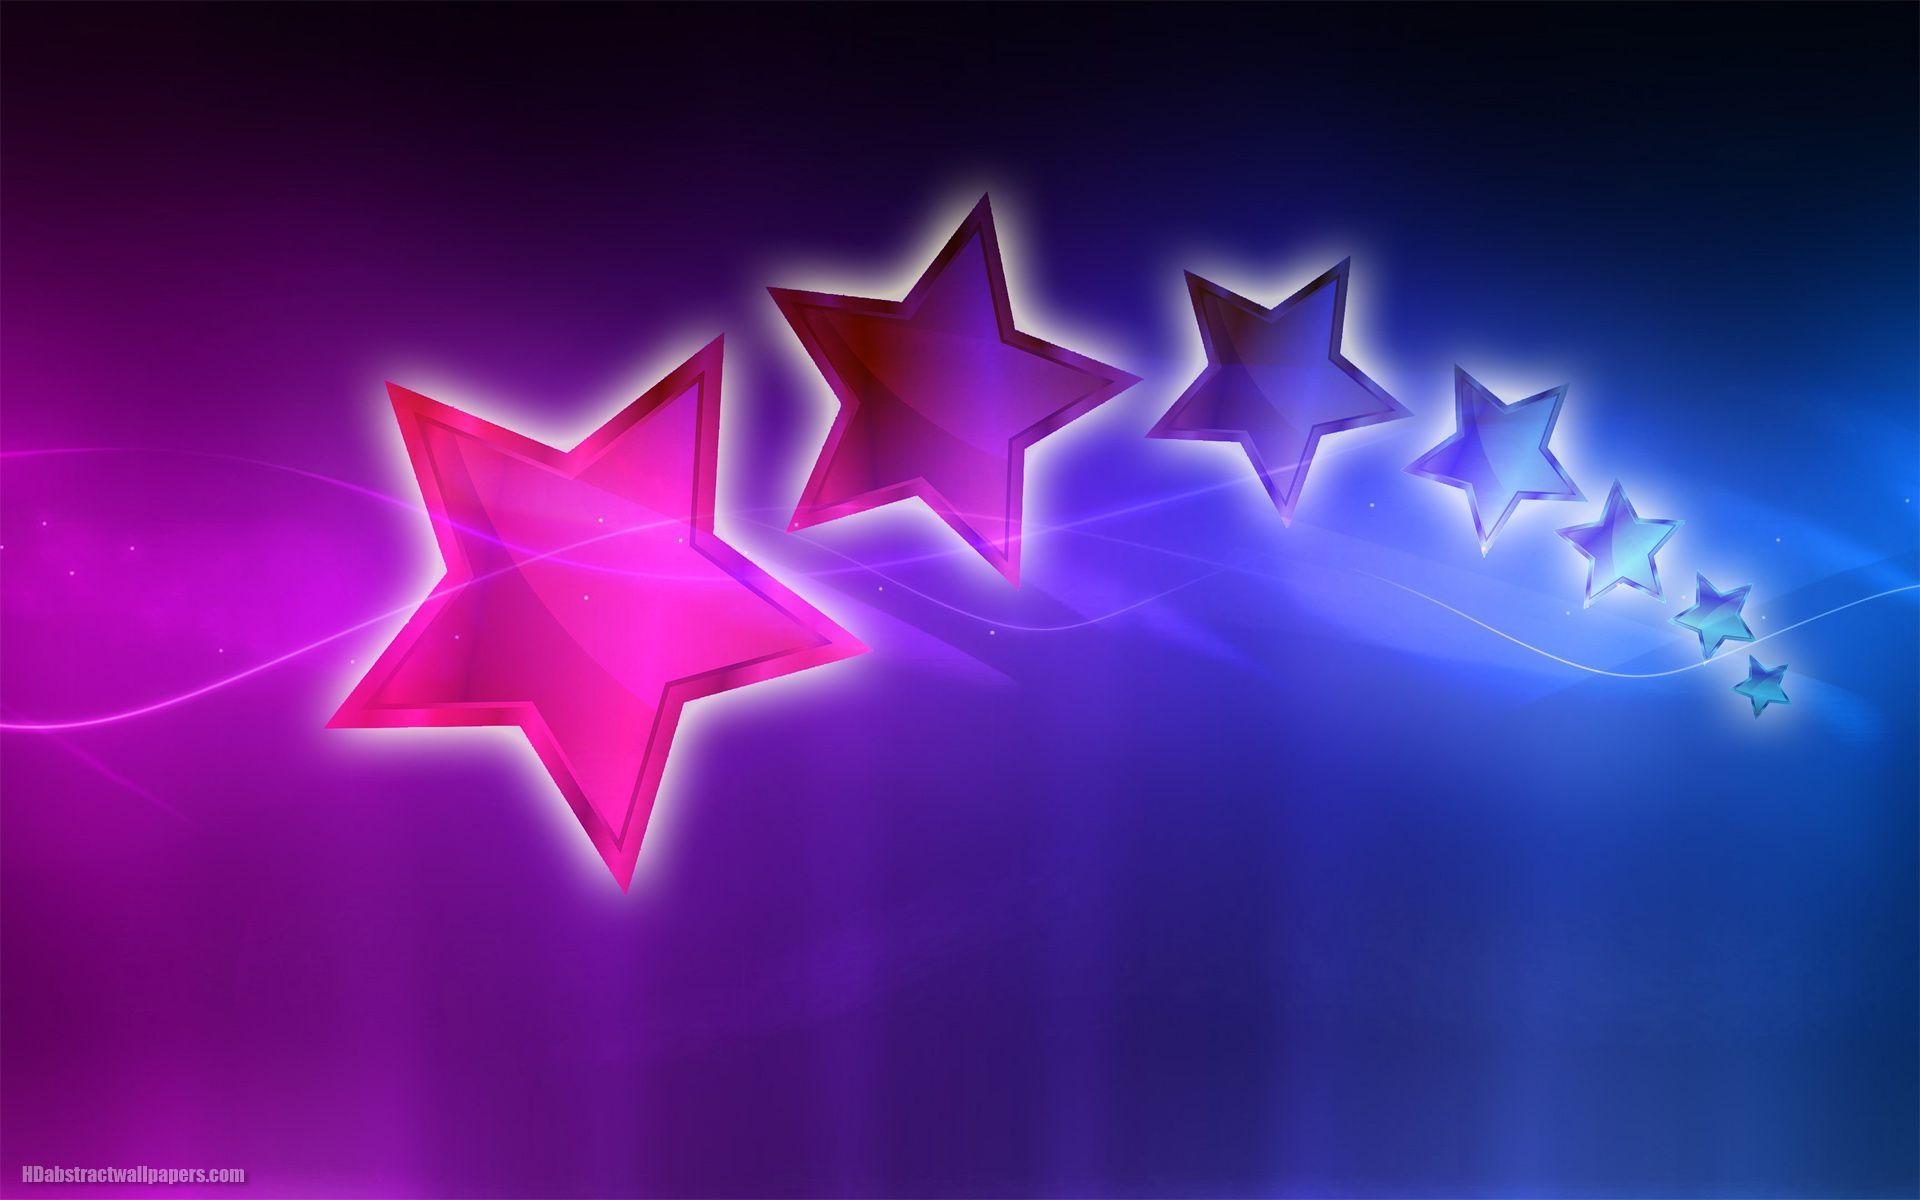 pink with stars wallpaper